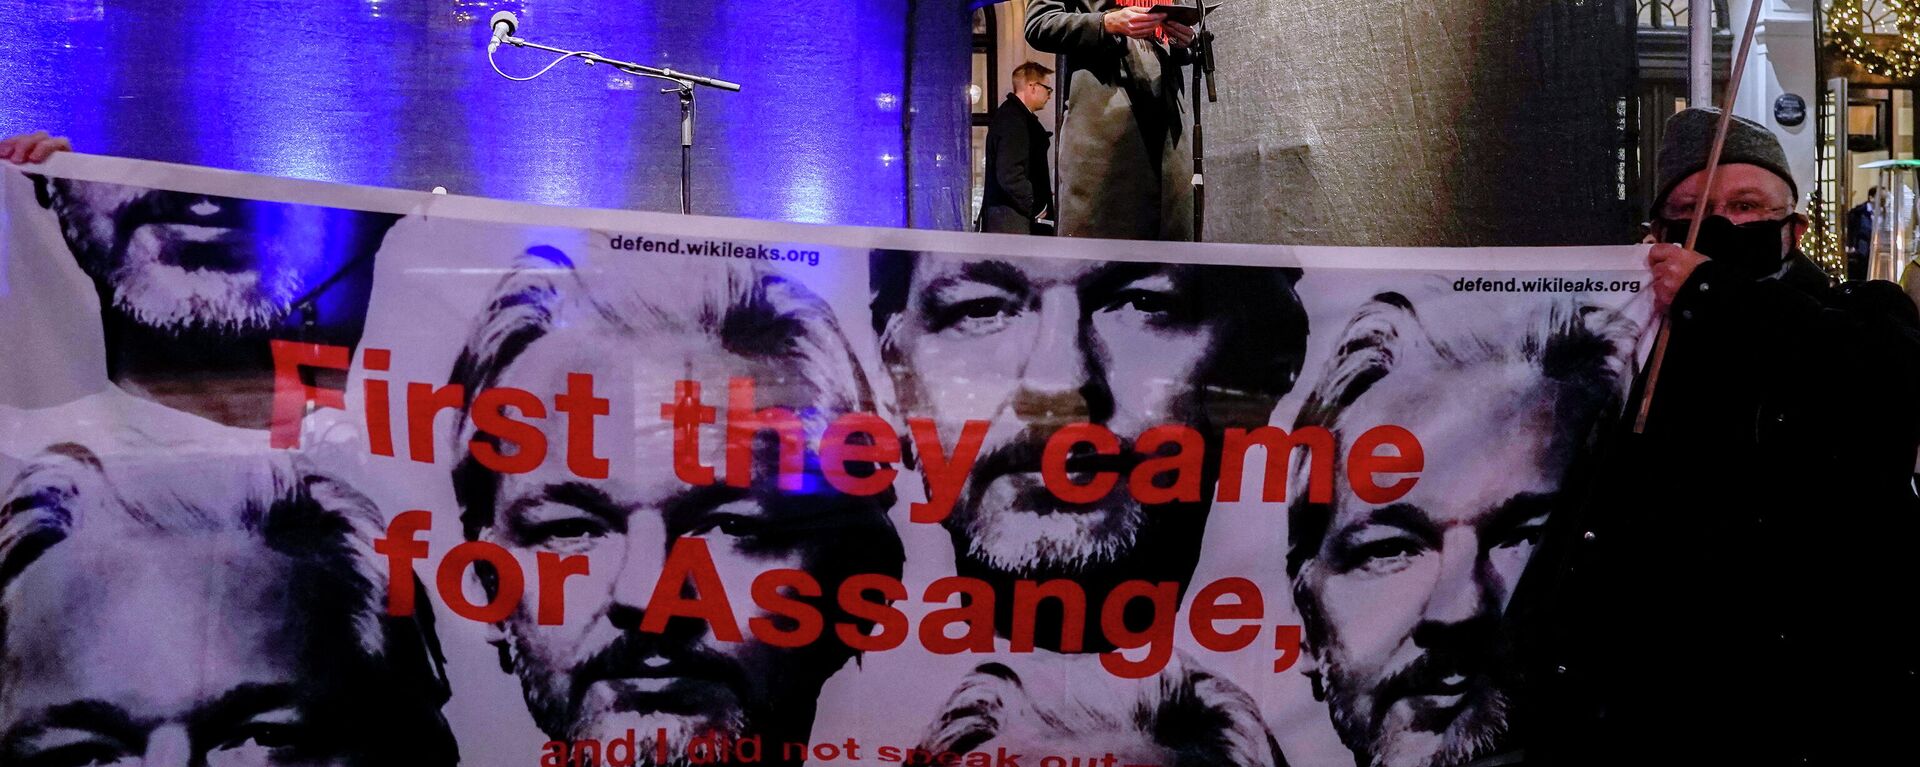 A banner in support of Julian Assange is displayed in front of a stage where the Norwegian Minister of Culture and Gender Equality Anette Trettebergstuen is holding an appeal before the torchlight procession in honour of this year's Nobel Peace Prize winners Maria Ressa and Dmitry Muratov in Oslo, Norway, December 10, 2021.  - Sputnik International, 1920, 11.12.2021